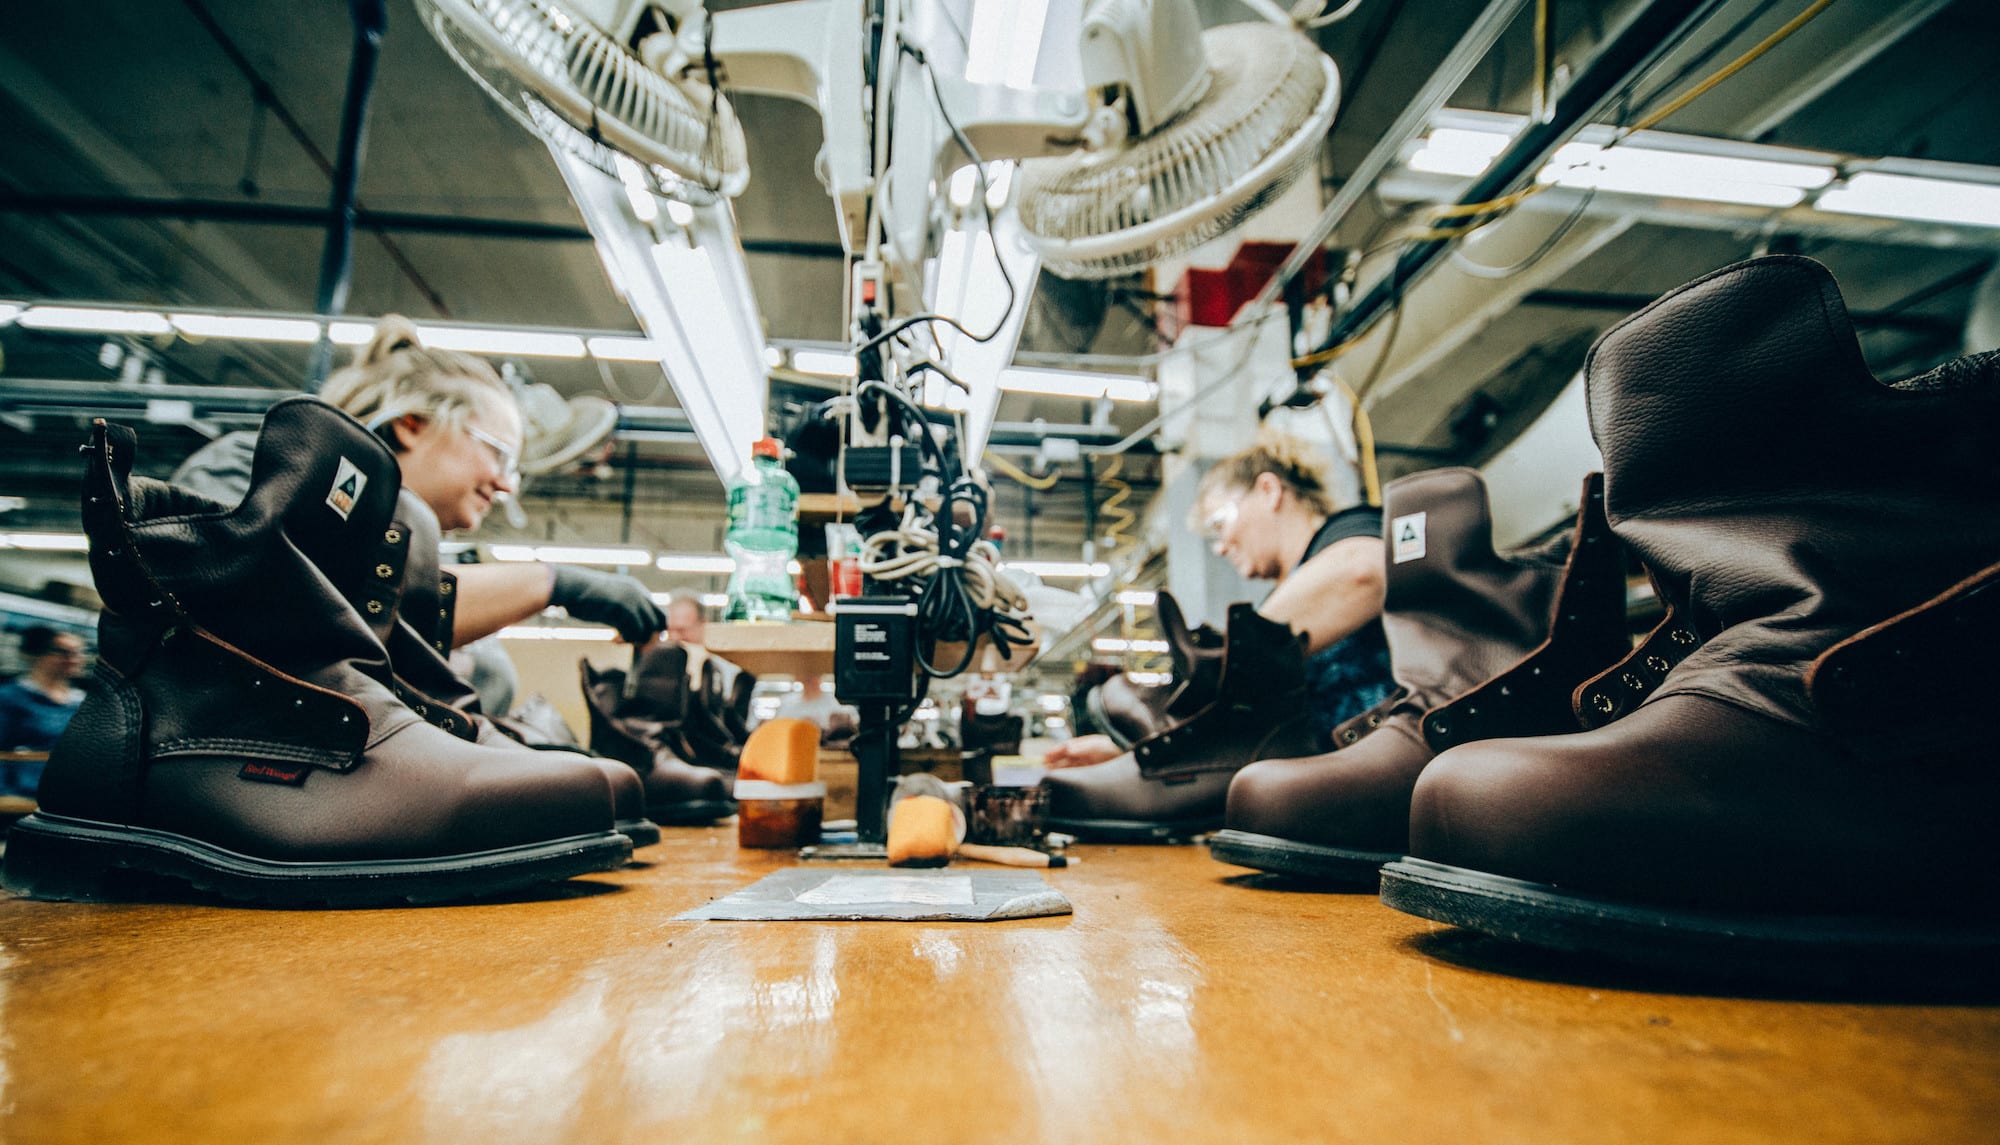 ICYMI: How Red Wing Shoes Wins the War for Skilled Talent